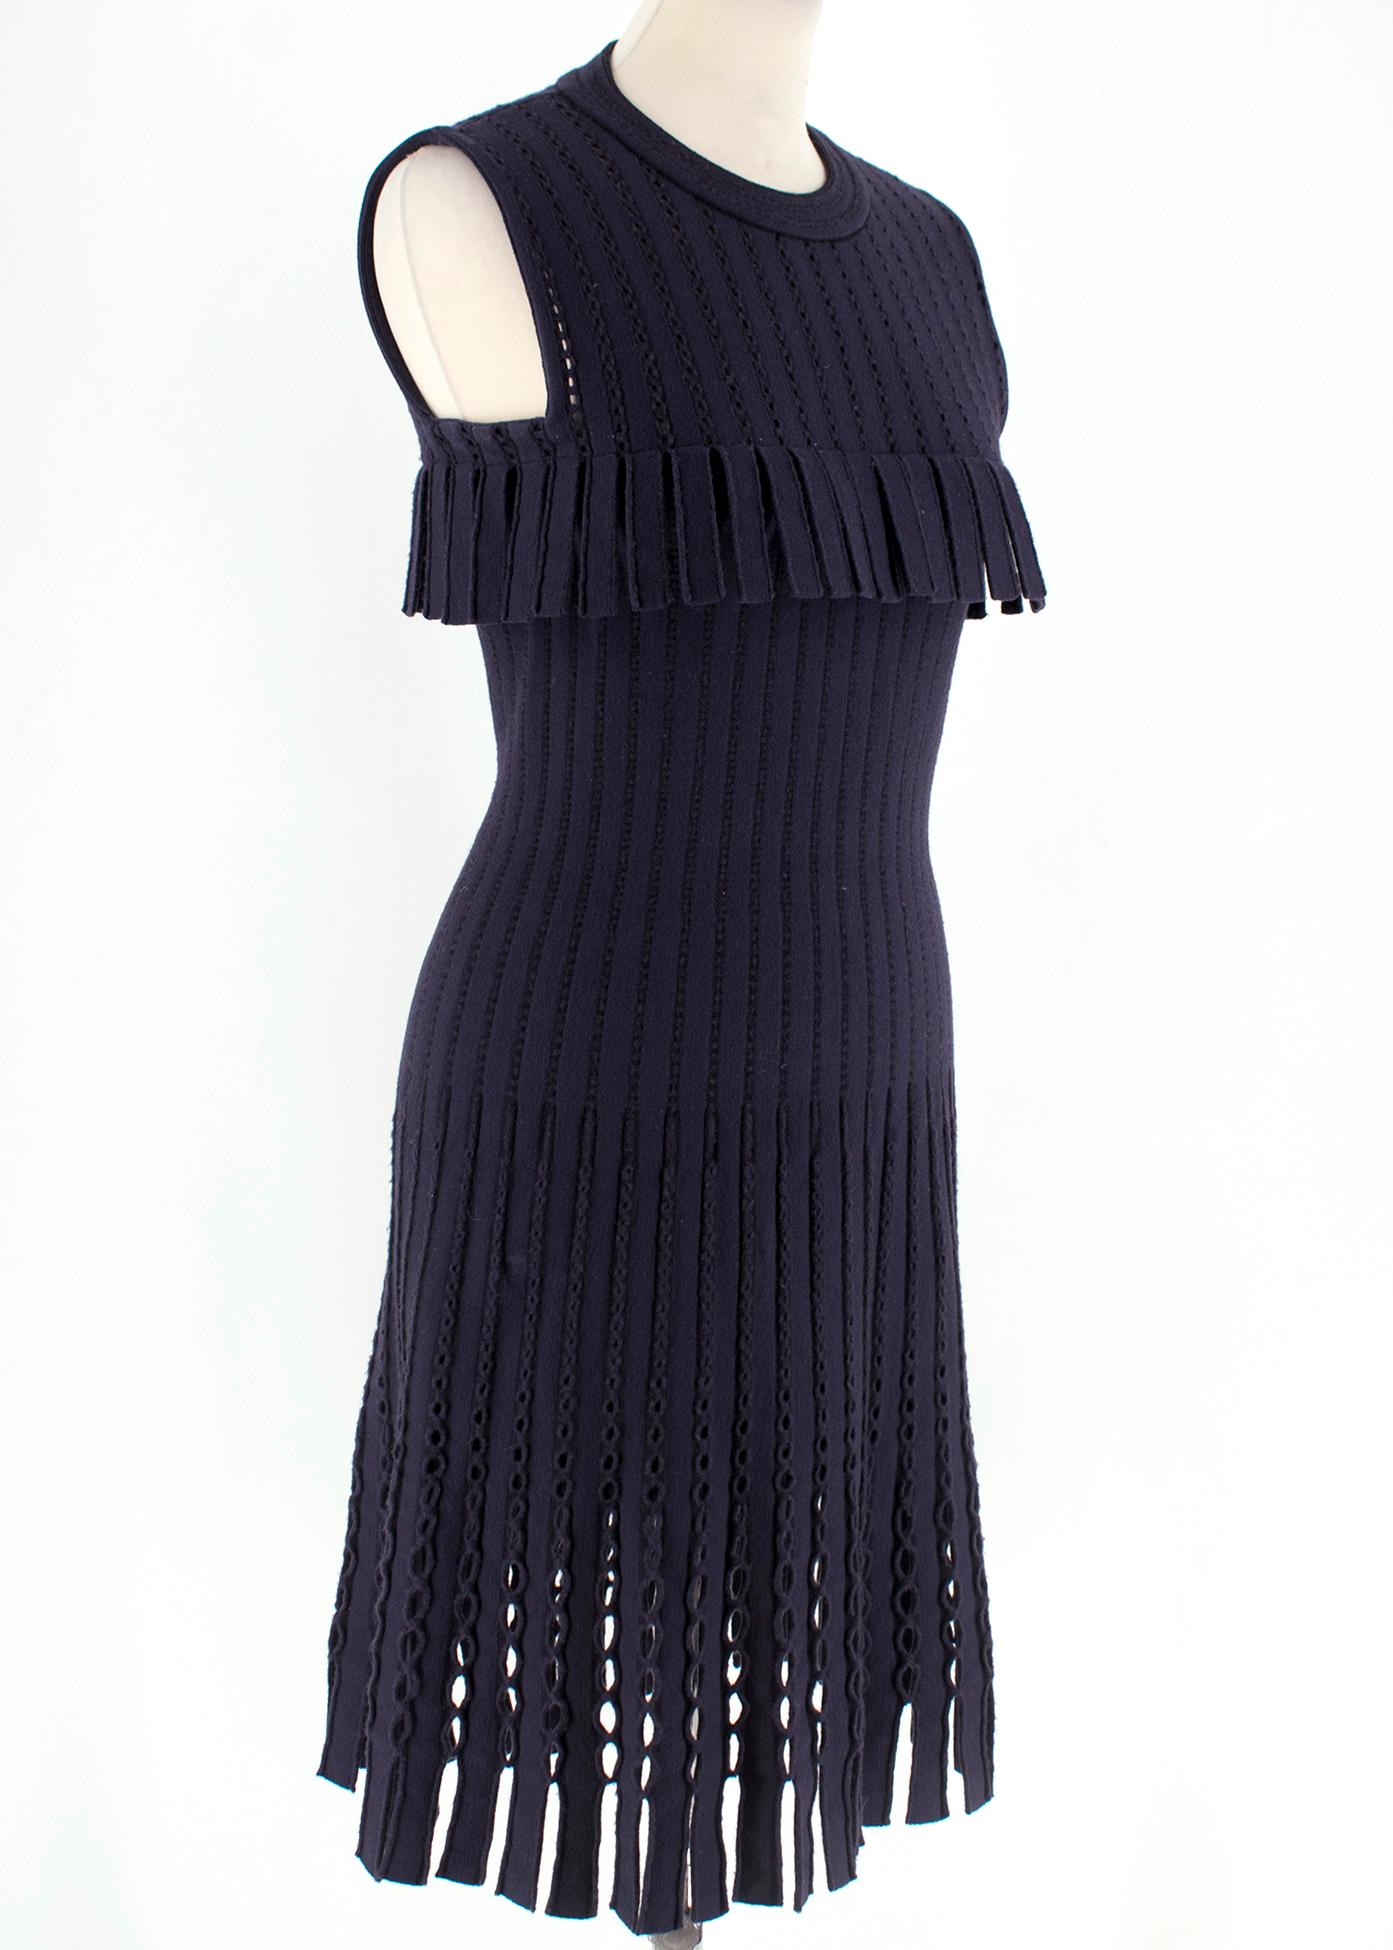 Alaia Navy/black striped wool dress. Featuring cut out and fringe details.  RRP £1775.00

- Mid-weigth knit 
- Body con stretch fit
- Loose at the hip
- Concealed back zip closure
- 70% Fleece Wool, 20% Polyamide, 10% Polyester
- Made in Italy
- Dry